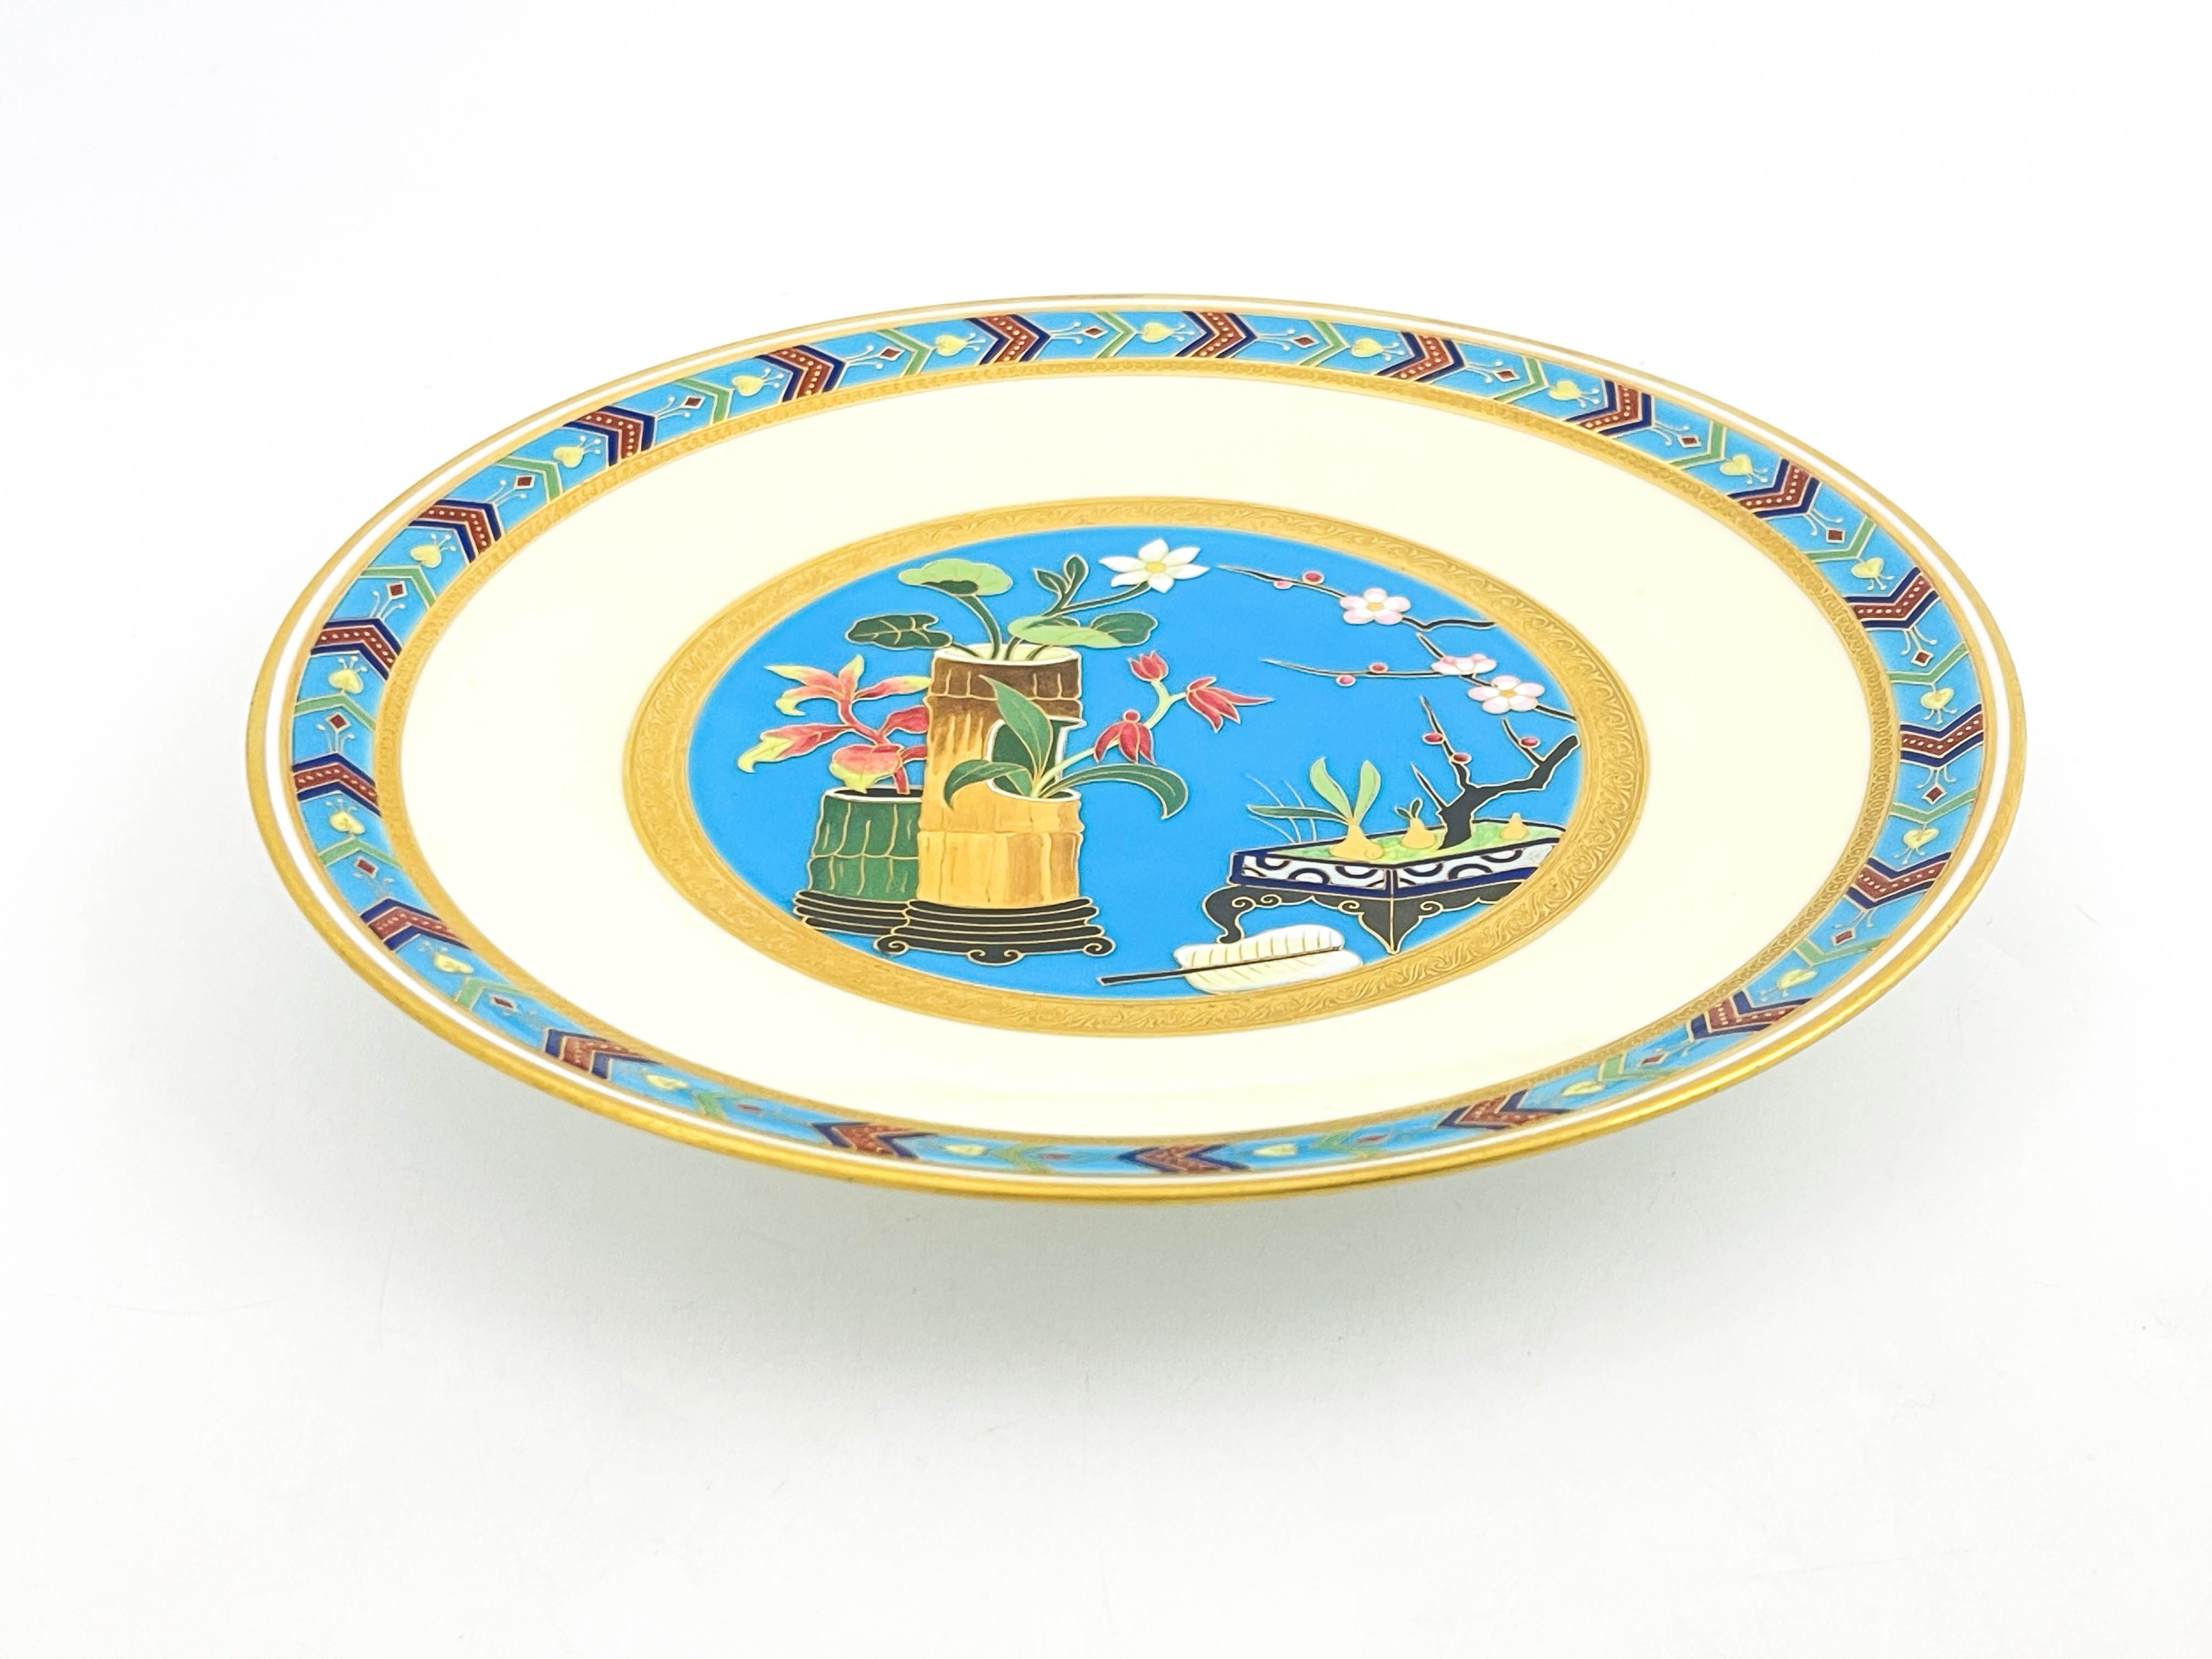 Christopher Dresser for Minton, an Aesthetic Movement plate - Image 2 of 4